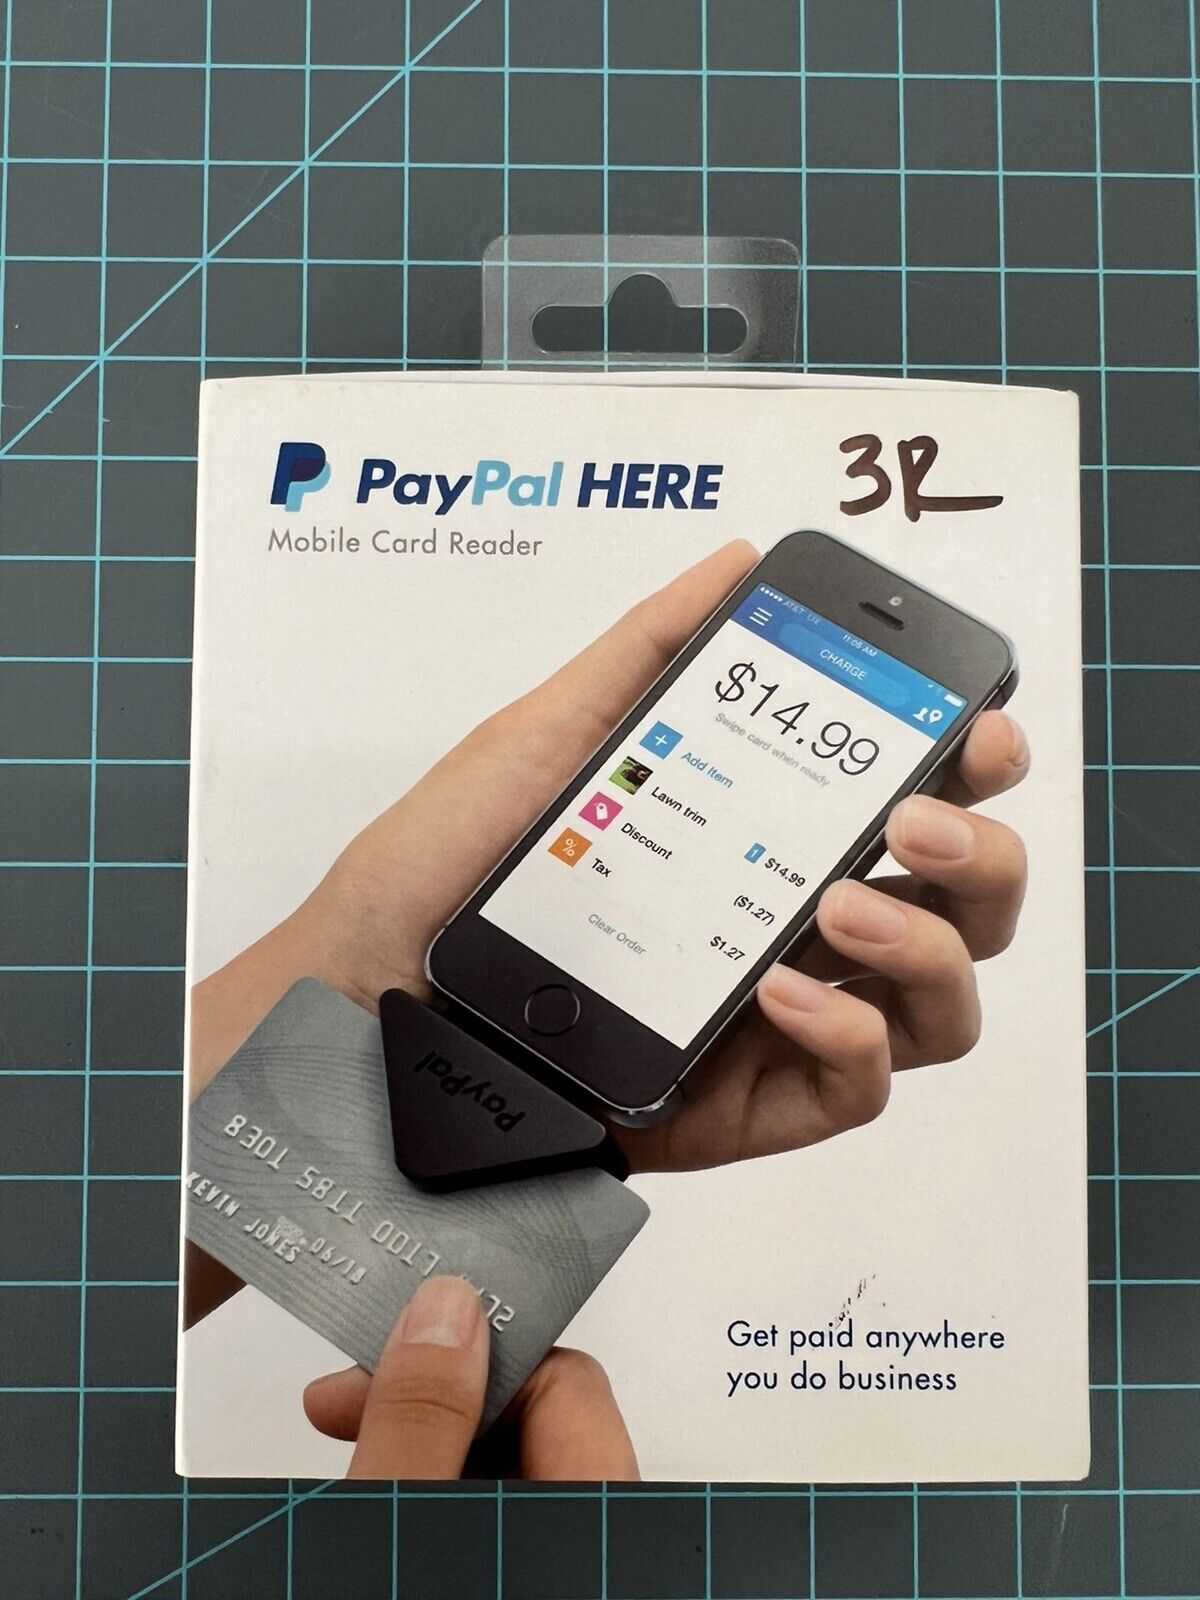 Paypal Mobile Here Card Reader For Iphone And Android Devices New / Open Box